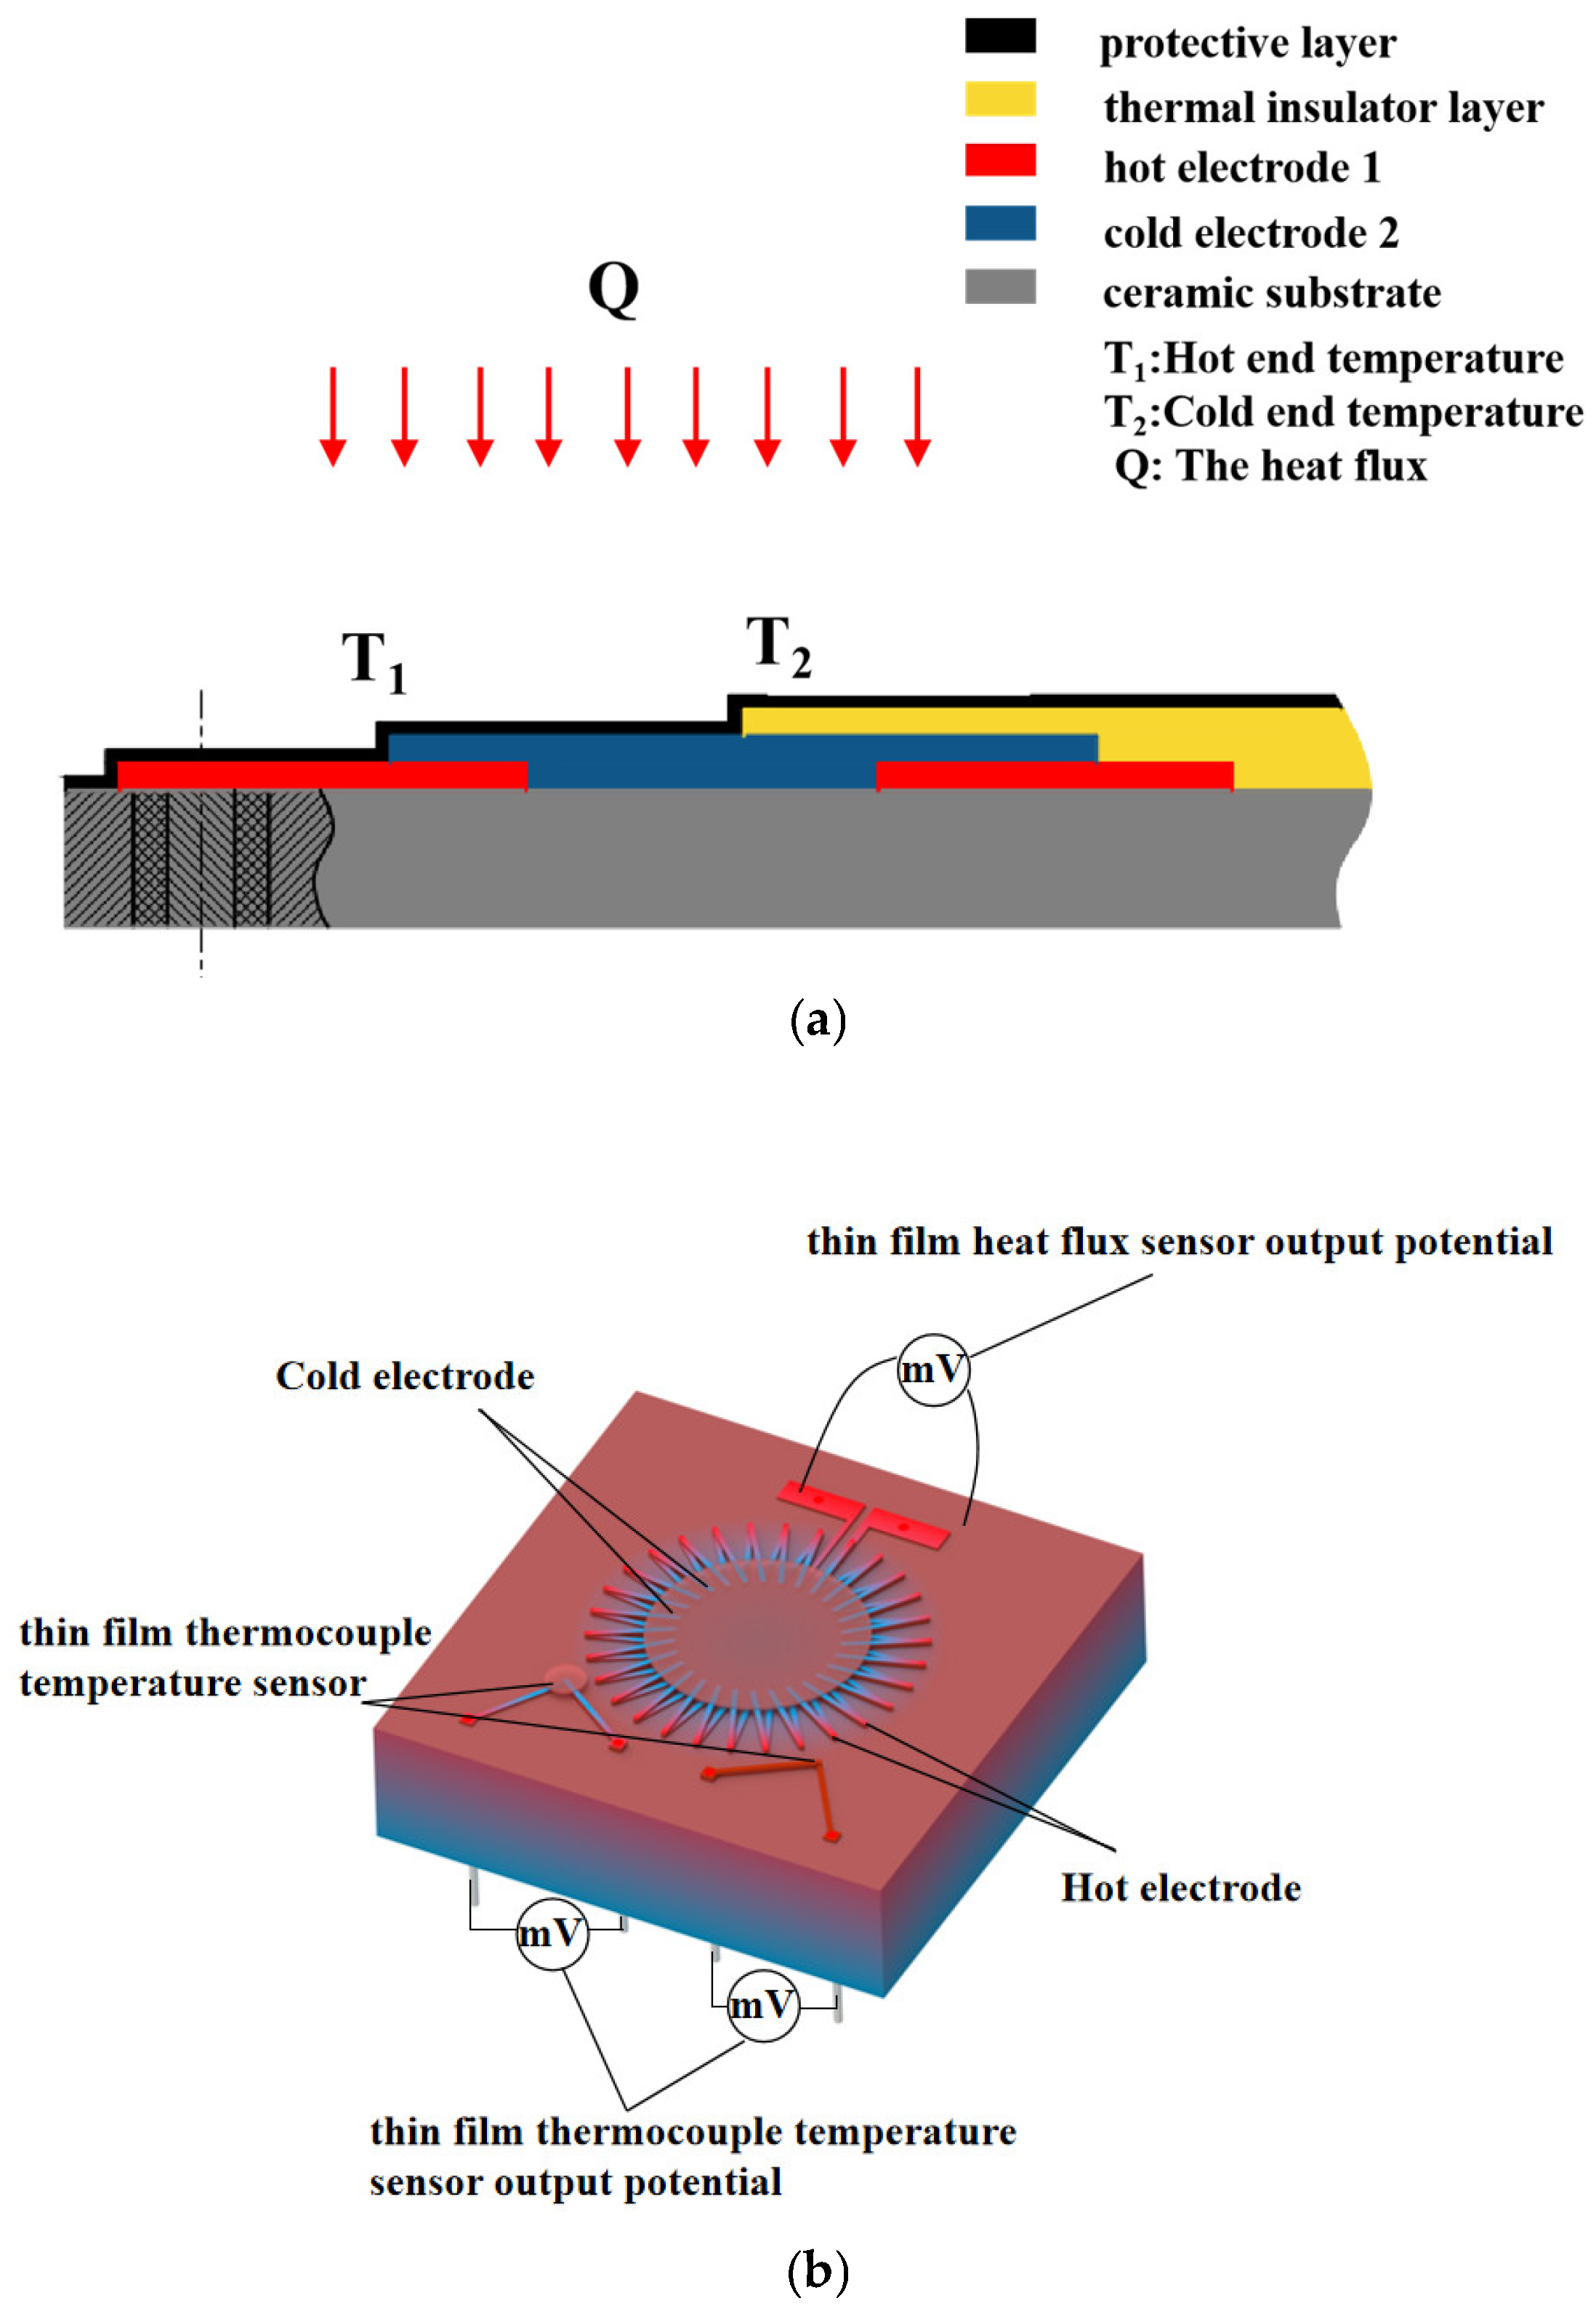 Coatings | Free Full-Text | Design and Fabrication of a Thermopile-Based  Thin Film Heat Flux Sensor, Using a Lead&mdash;Substrate Integration Method